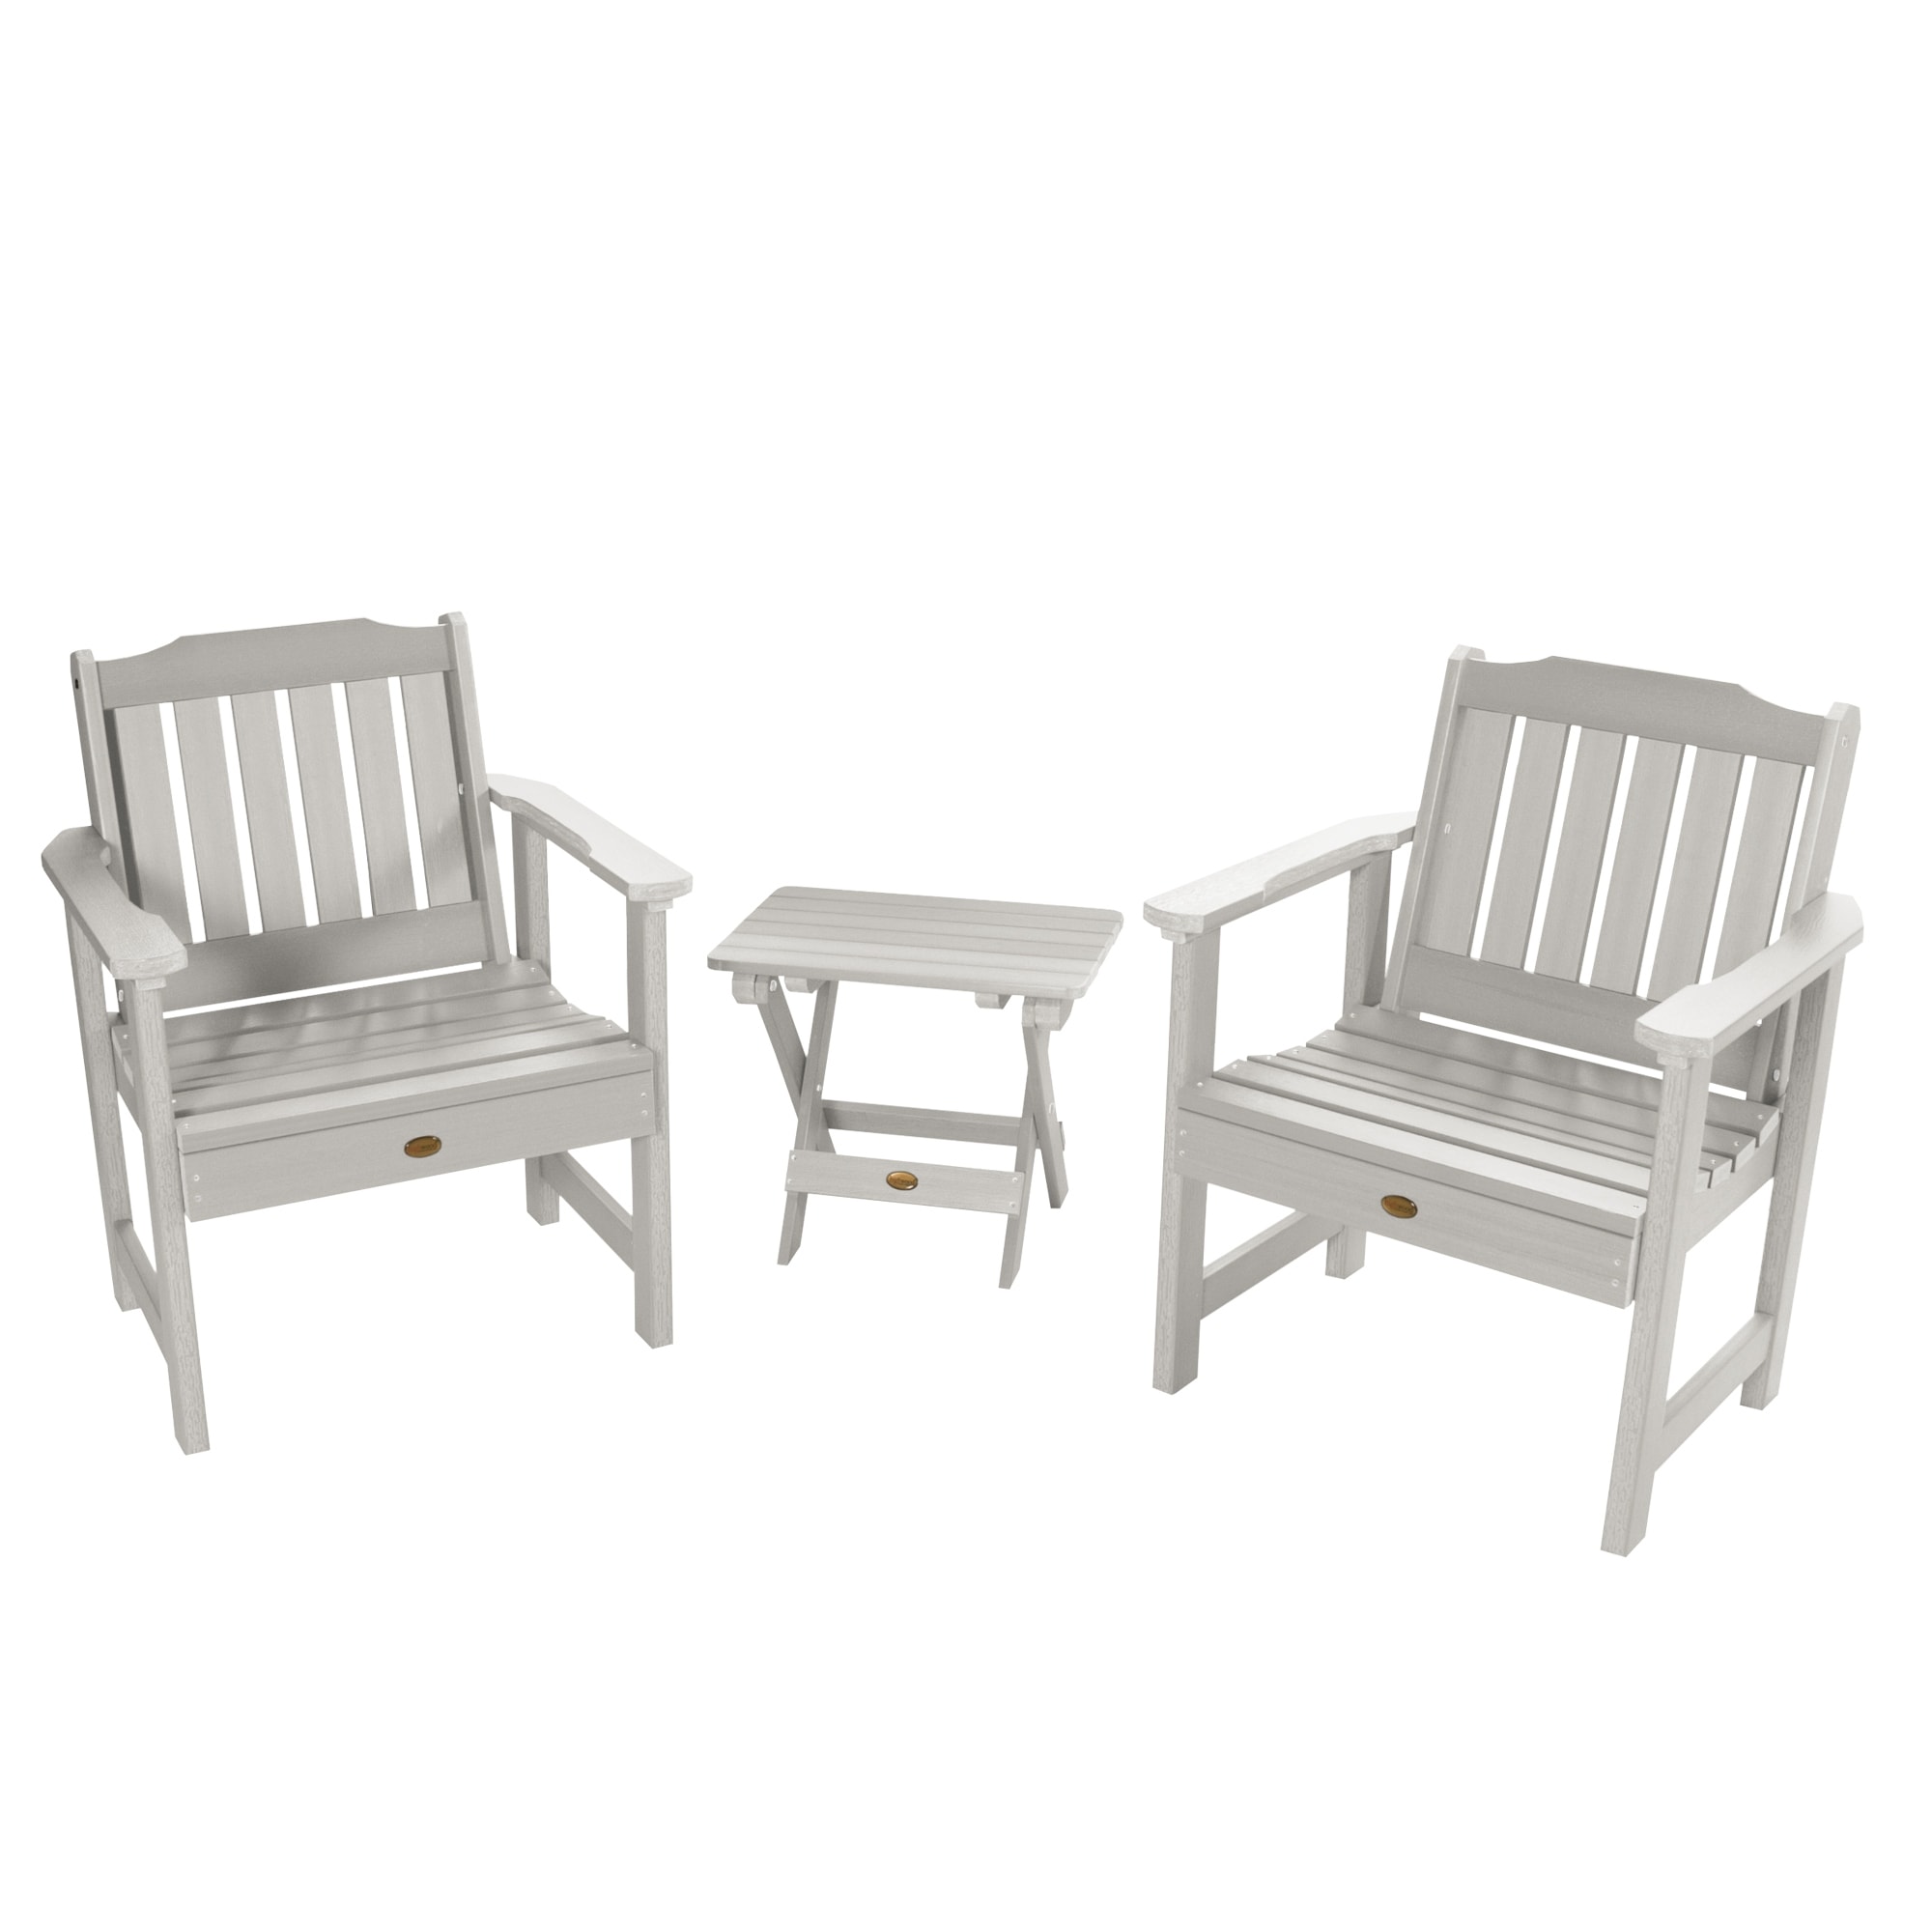 Garden Chairs And Folding Side Table (3-piece Set)